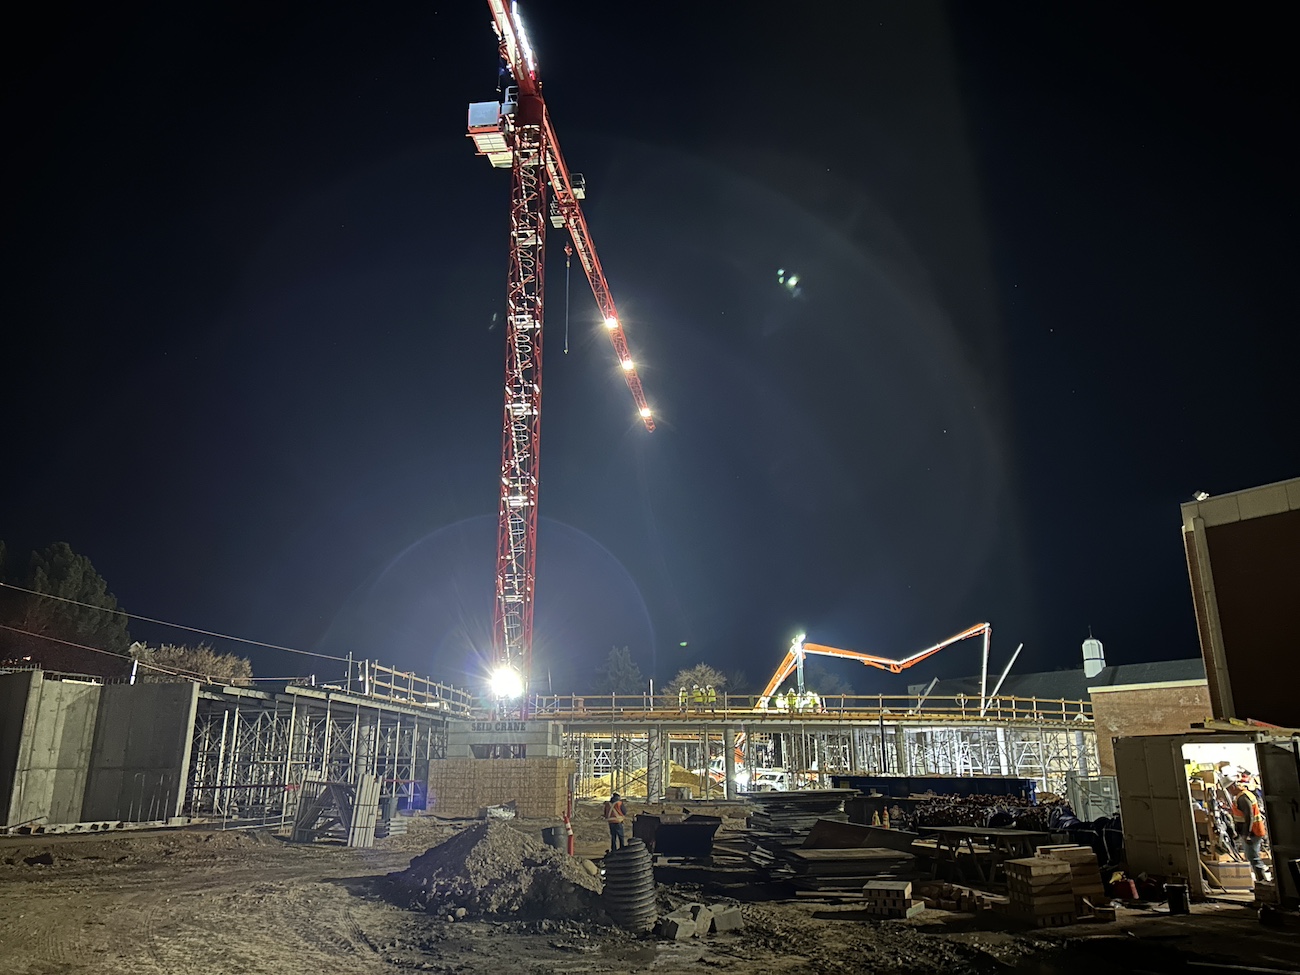 A construction site at night with an illuminated crane